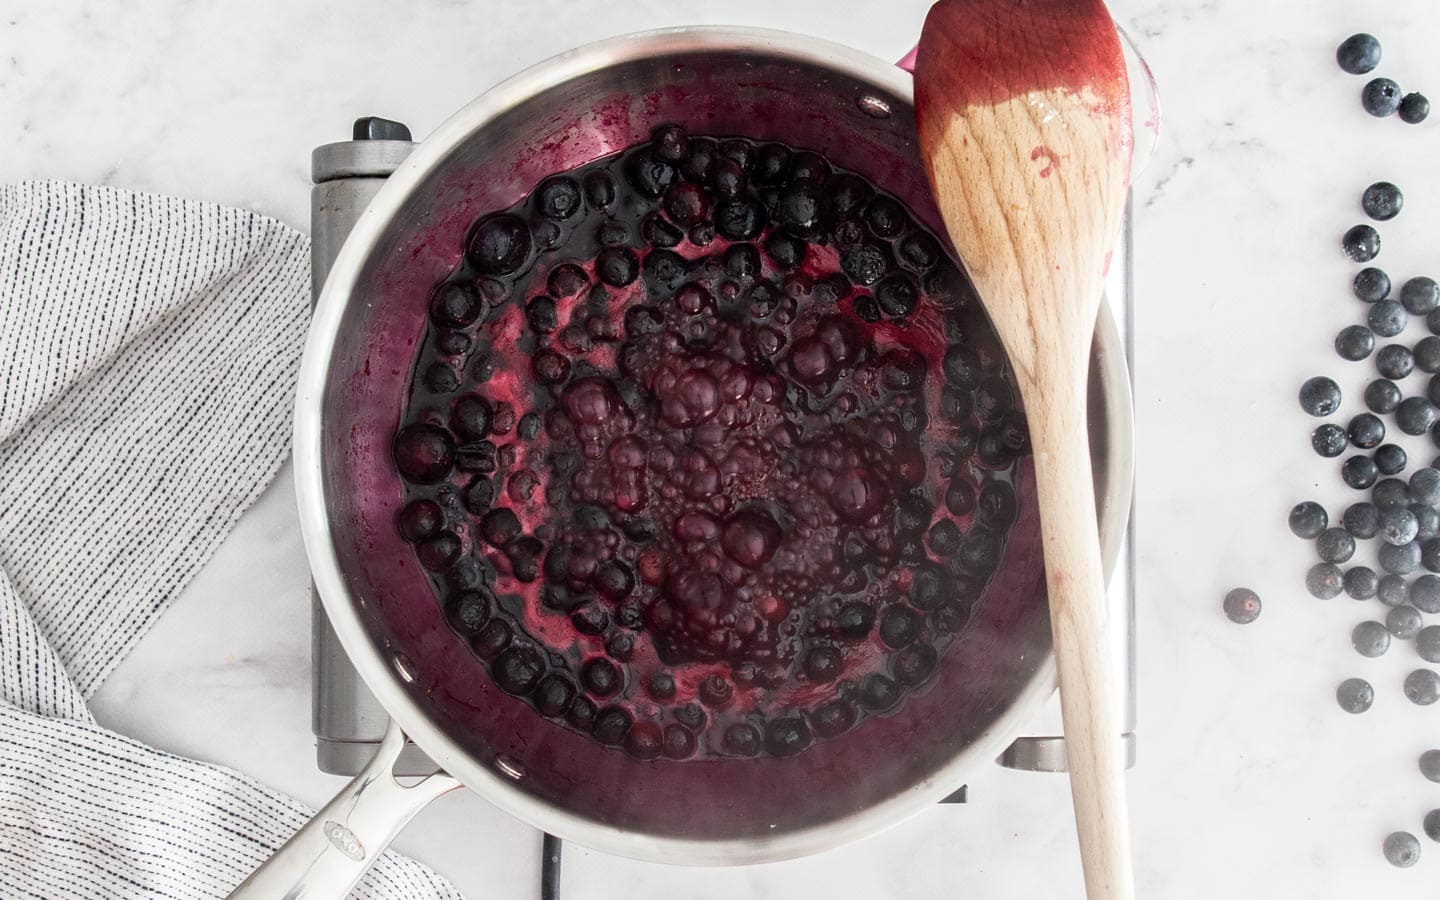 The blueberry sauce boiling in a saucepan.